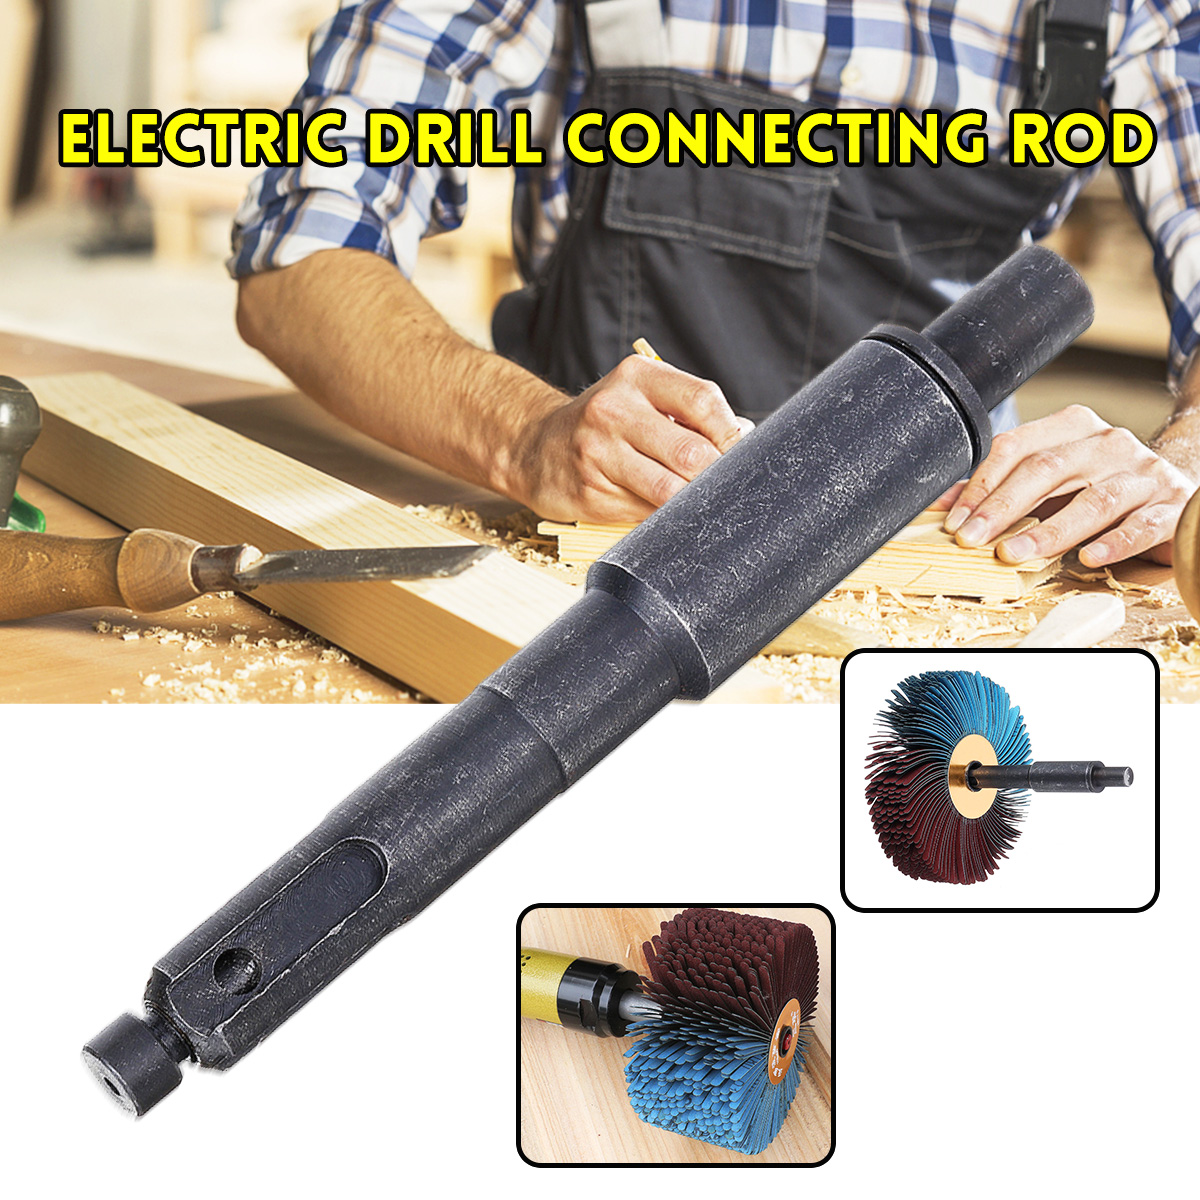 115x10x7mm-Electric-Drill-Connecting-Rod-Head-Connected-with-Polishing-Cloth-Wheel-1474551-1